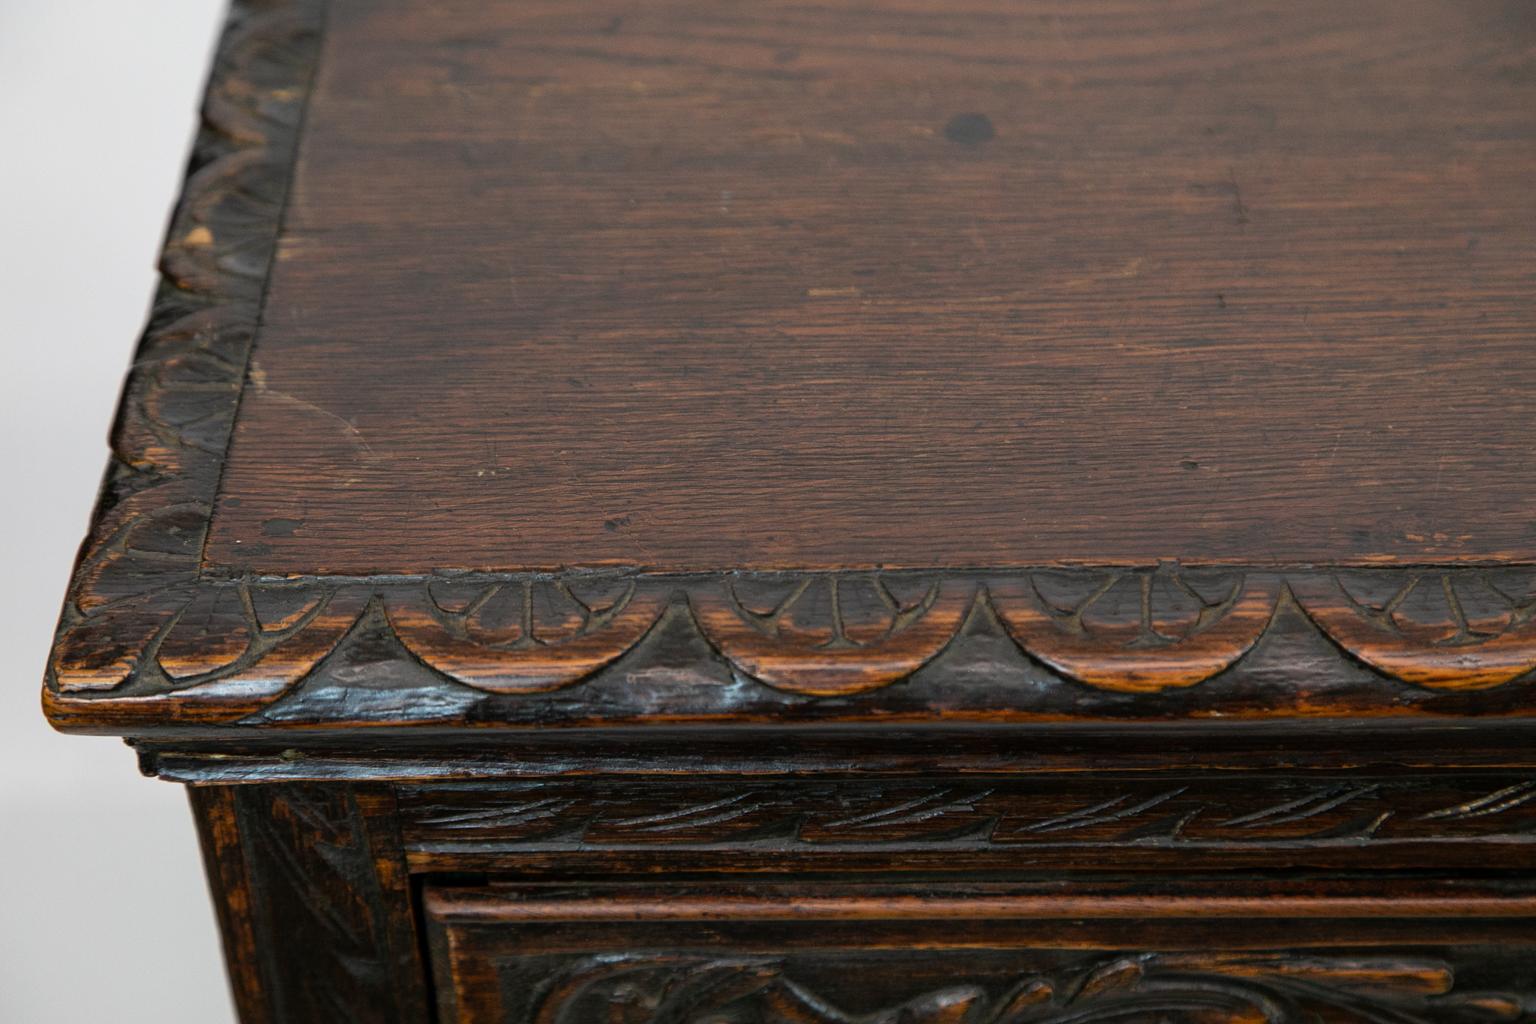 Carved oak English sideboard, with the drawers are carved with oak leaf and acorn banding and have etched brass pulls, the sides with inset panels. The apron and top moldings are carved with semicircular leaf carvings.